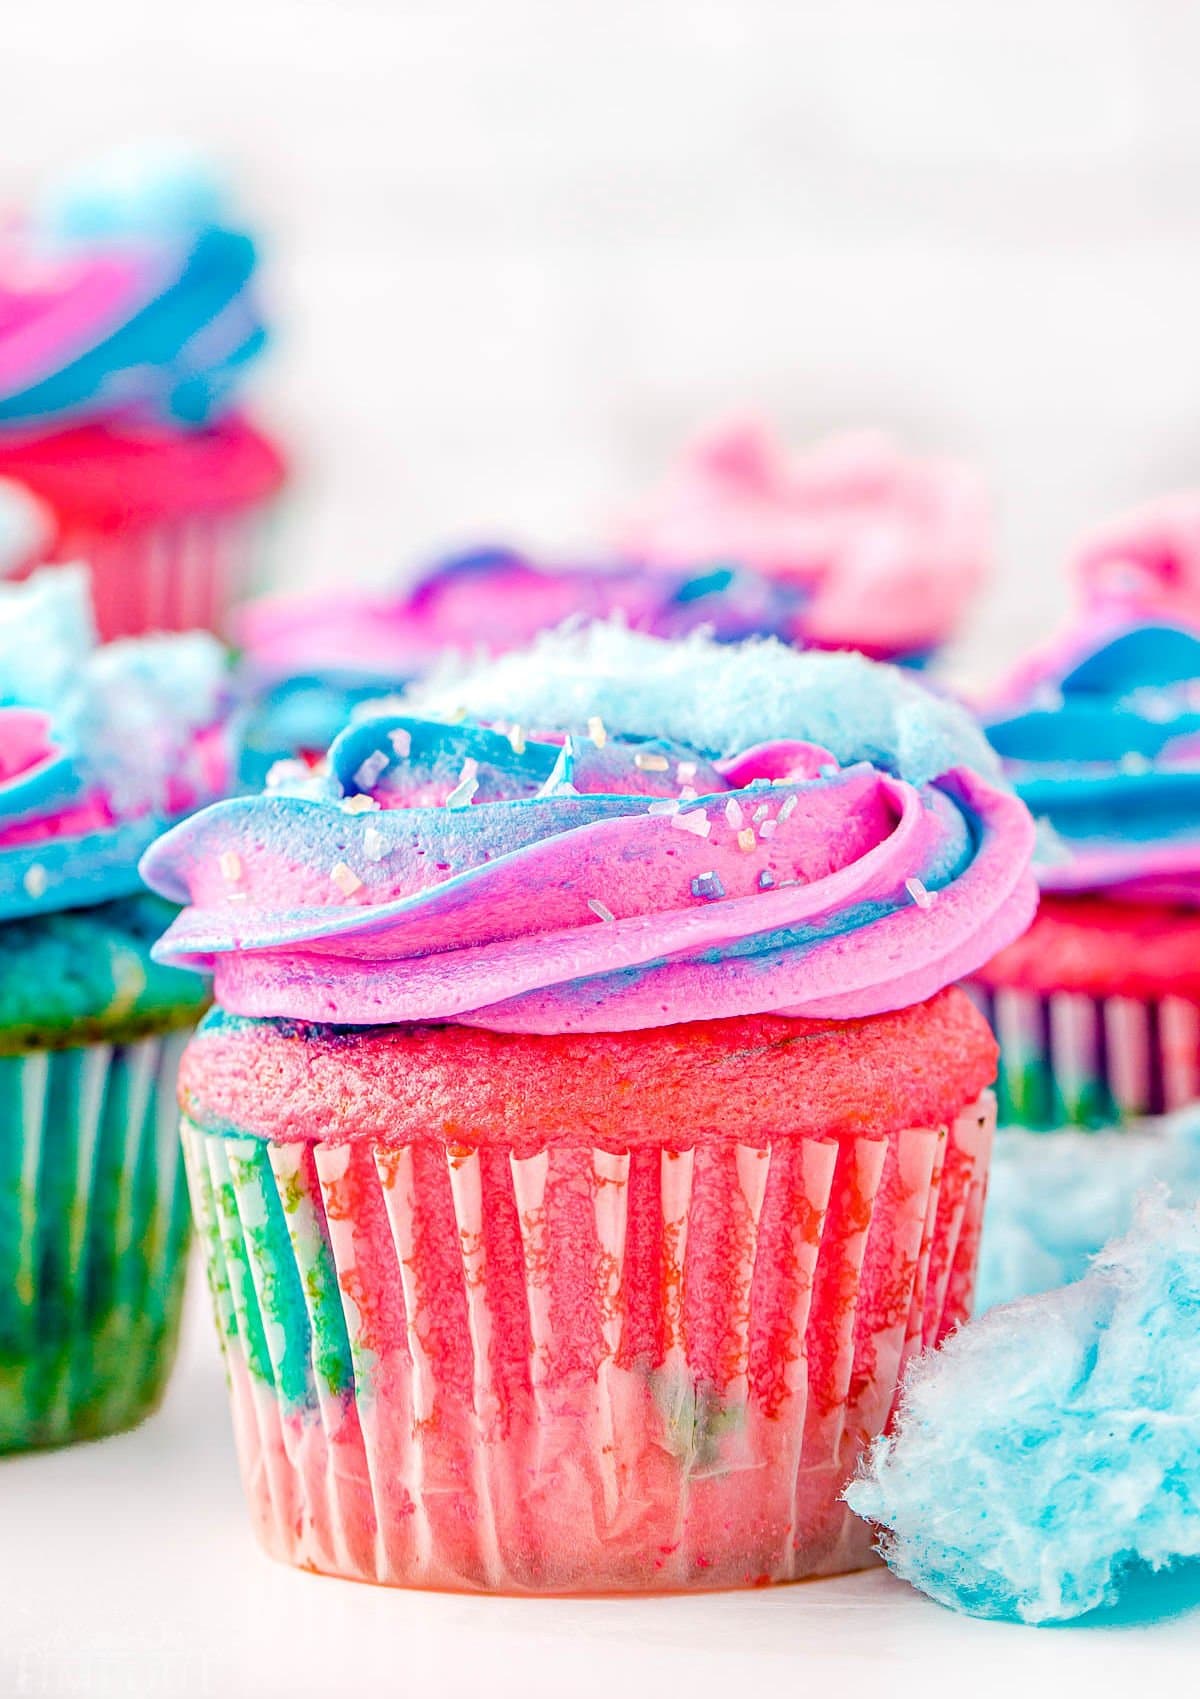 lots of cotton candy cupcakes decorated with pink and blue frosting and topped with cotton candy ready to be enjoyed. Bits of cotton candy are scattered around the cupcakes as well.